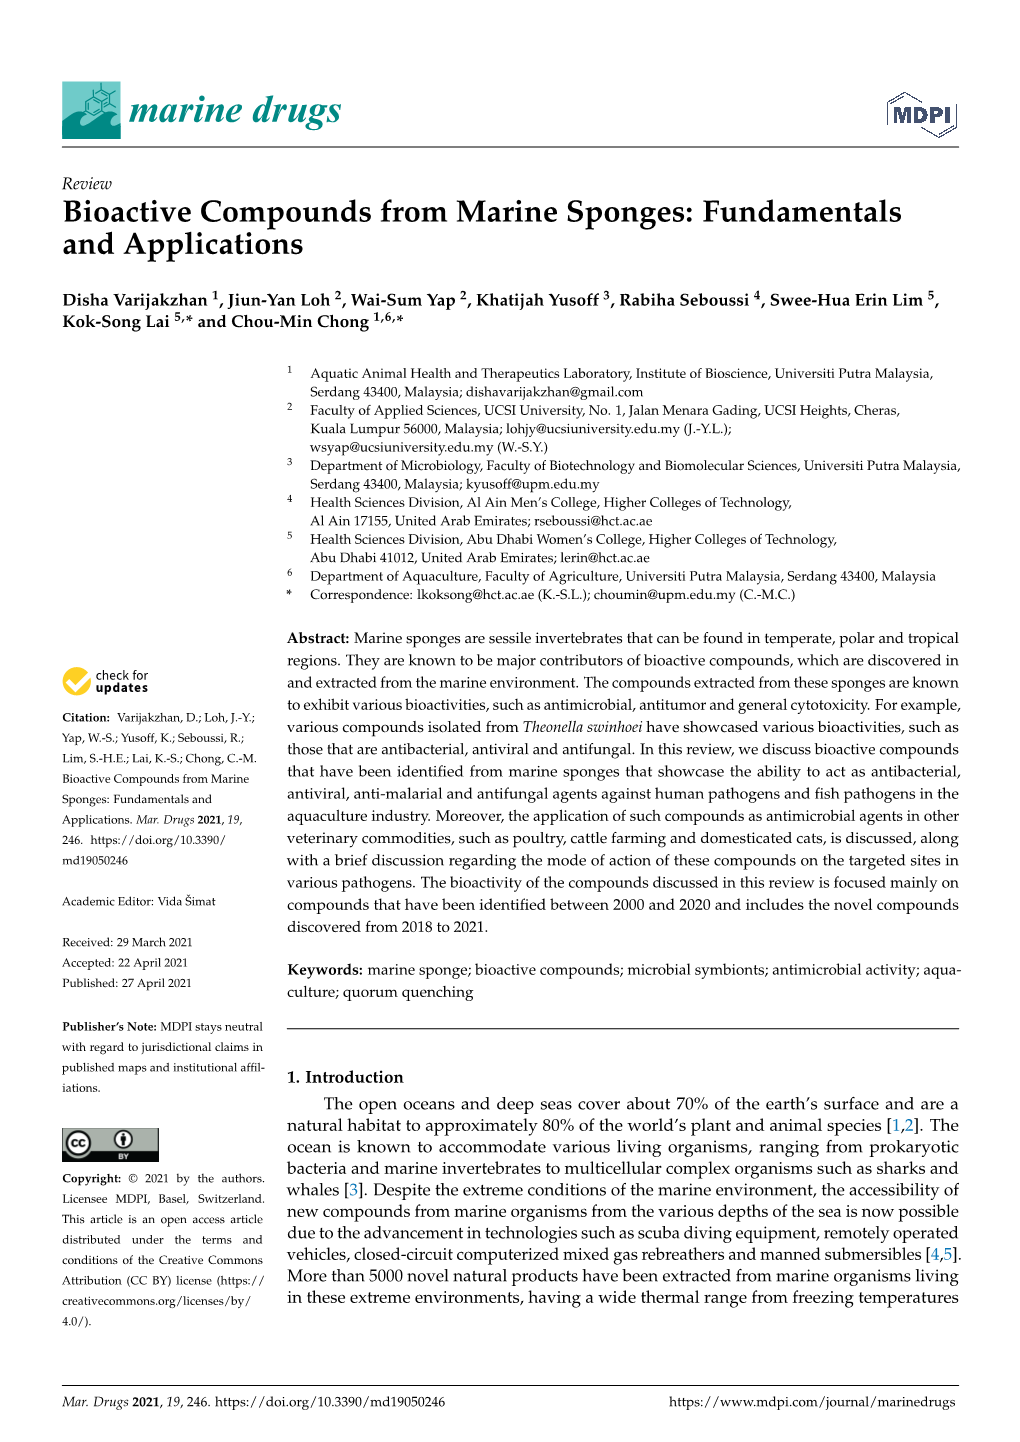 Bioactive Compounds from Marine Sponges: Fundamentals and Applications